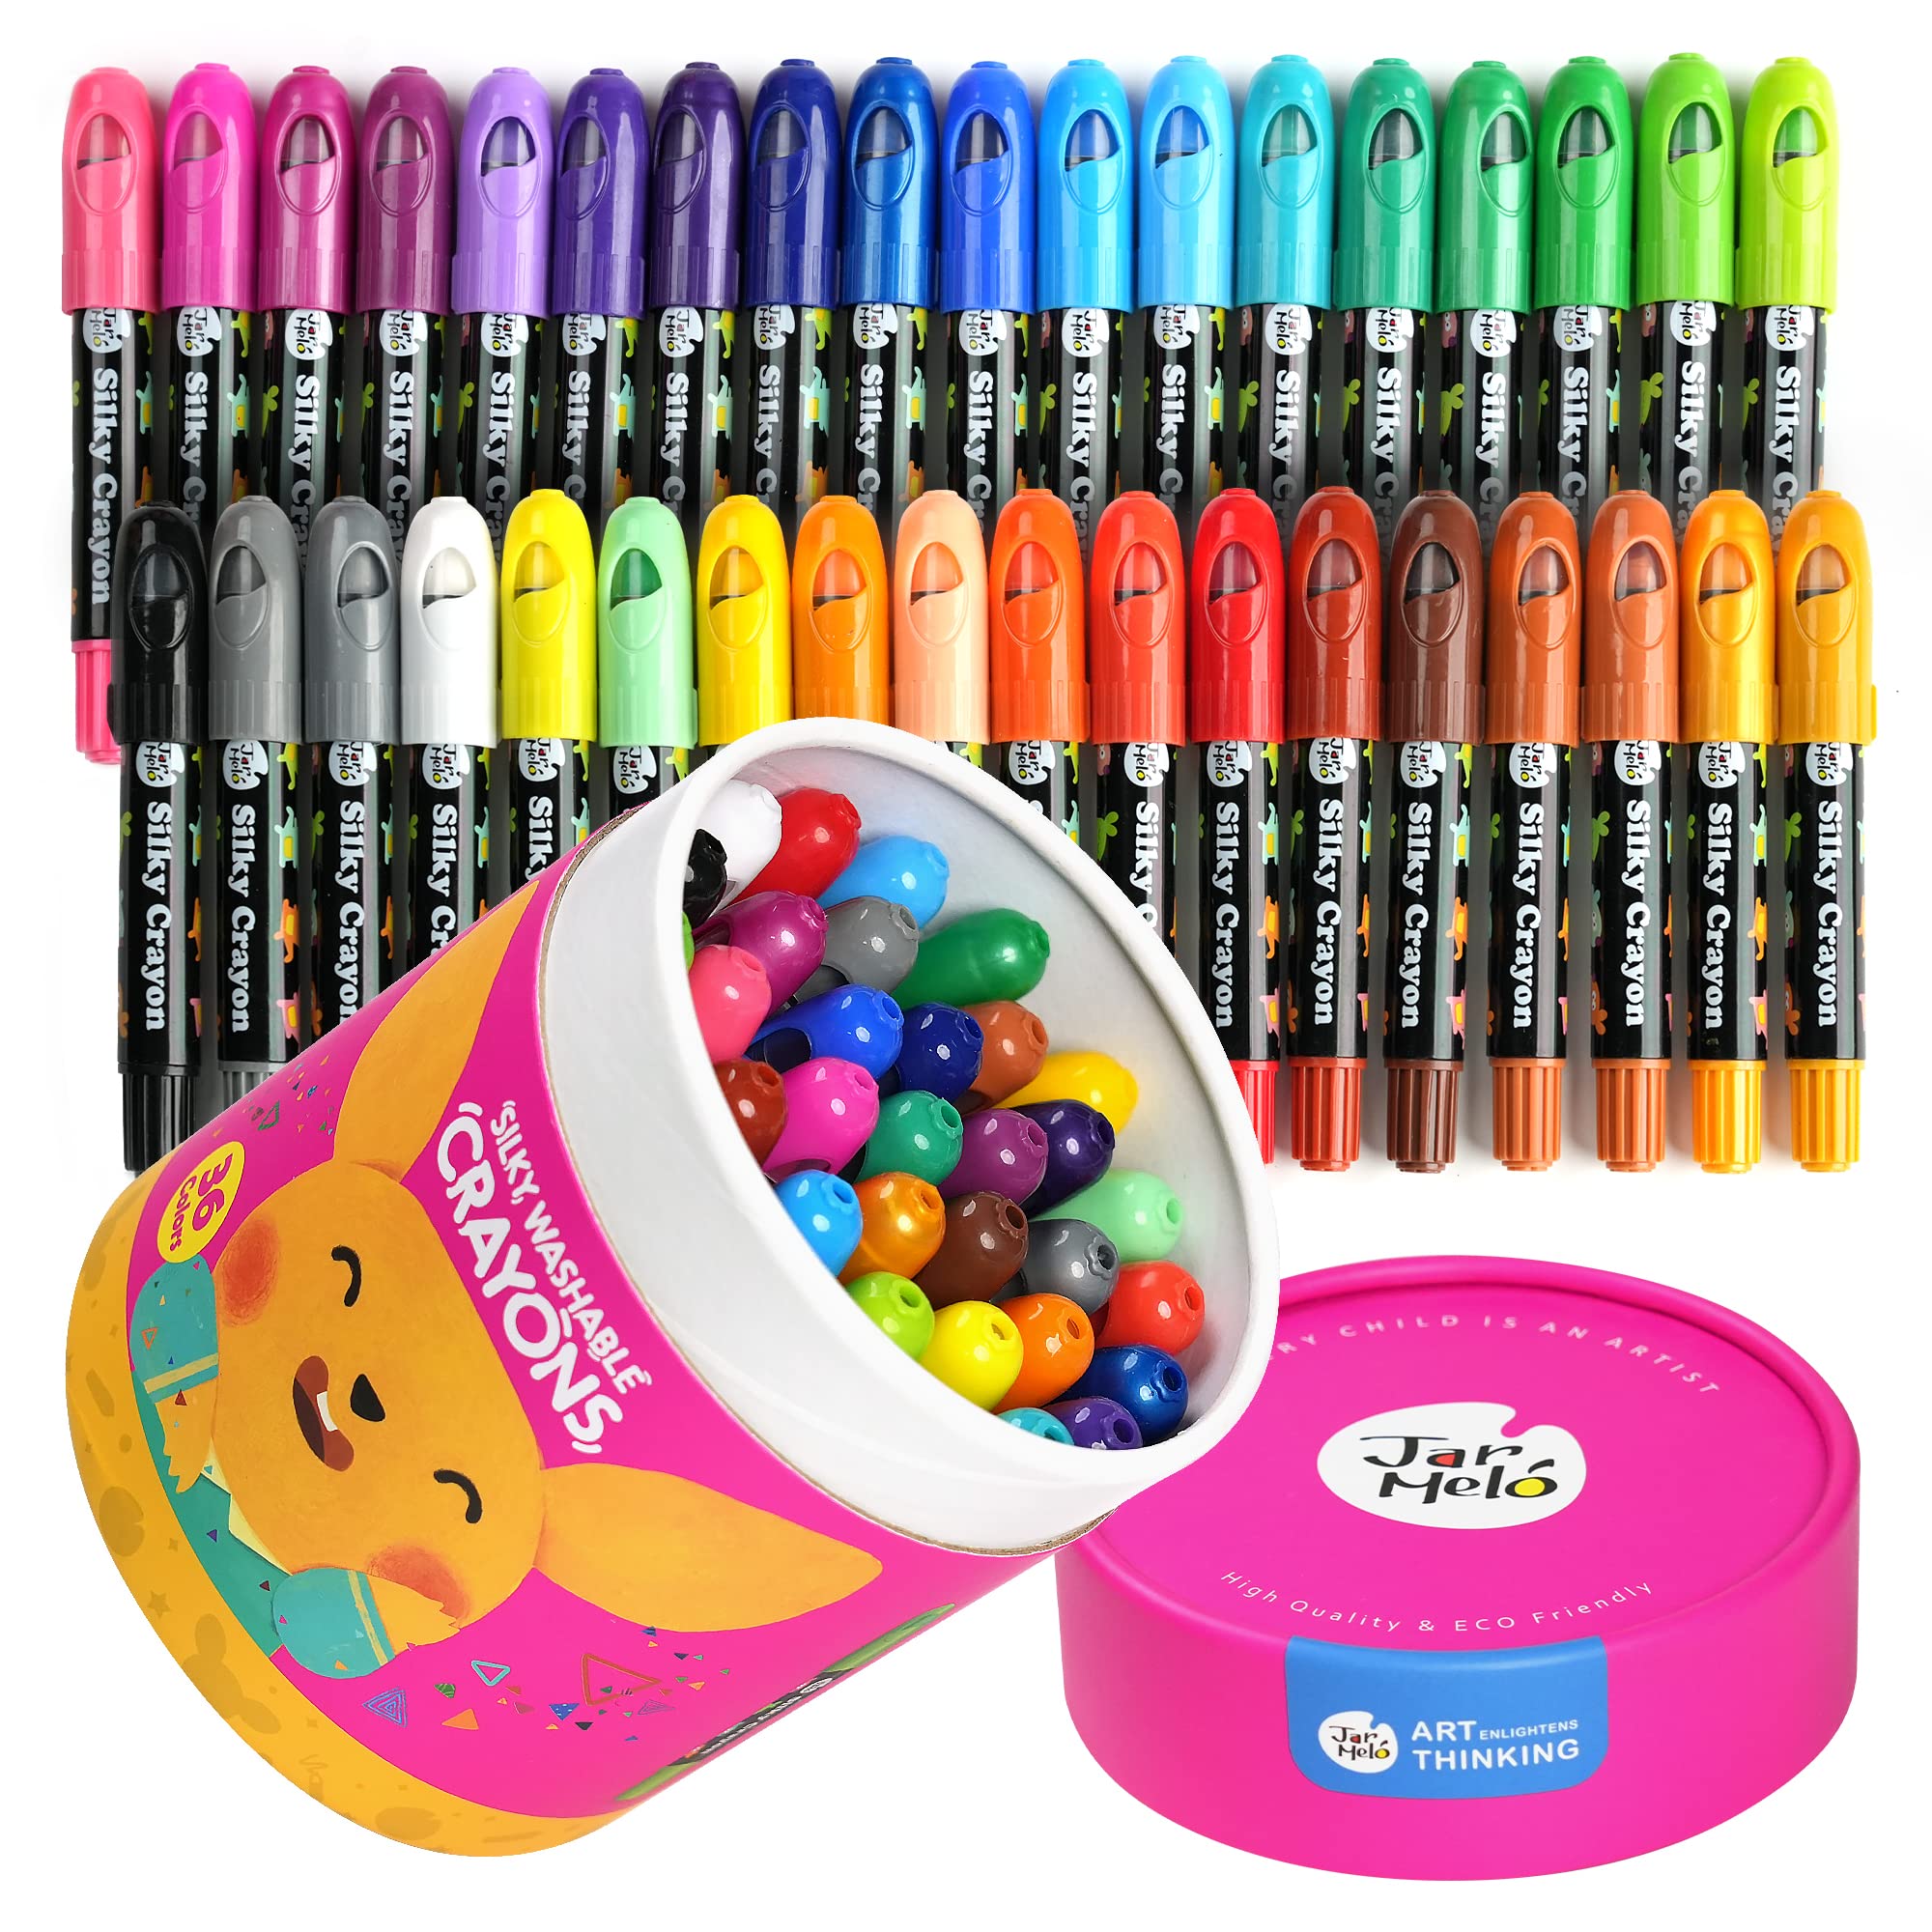 Jar Melo Key Crayons For Toddlers, 24 Colors Washable Jumbo